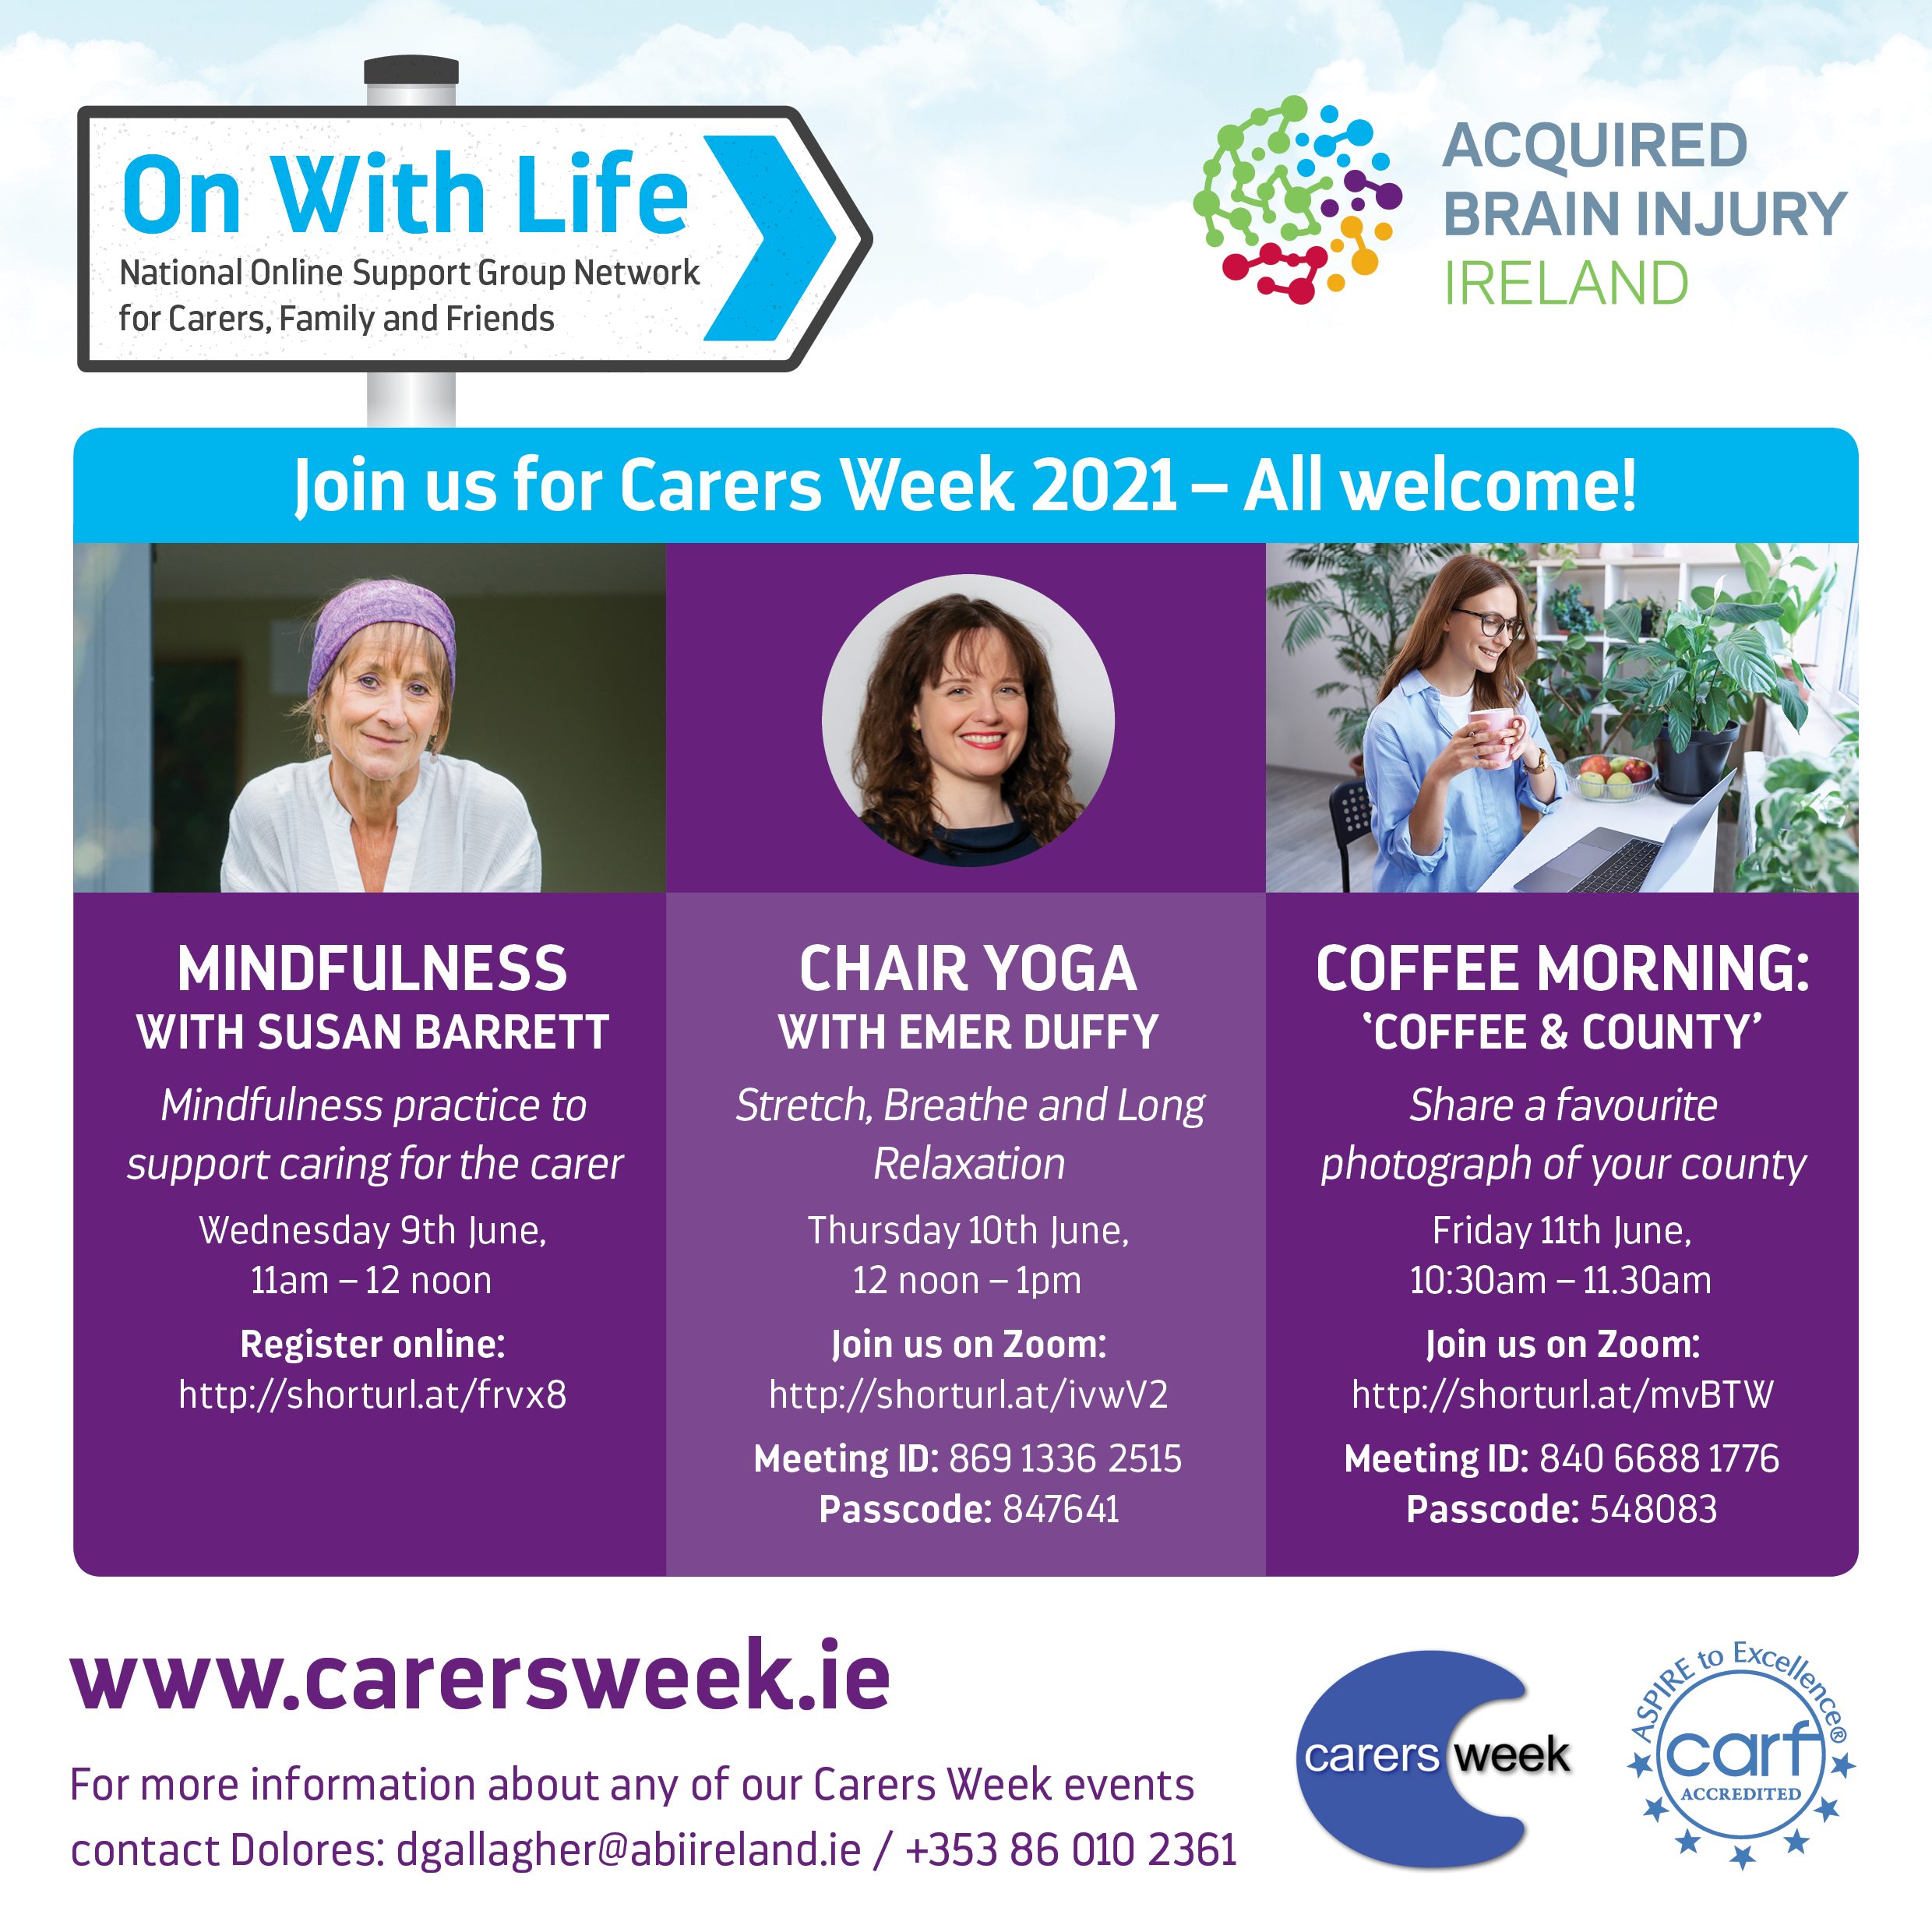 On With Life Carers and Families Programme presents events for Carers Week 2021